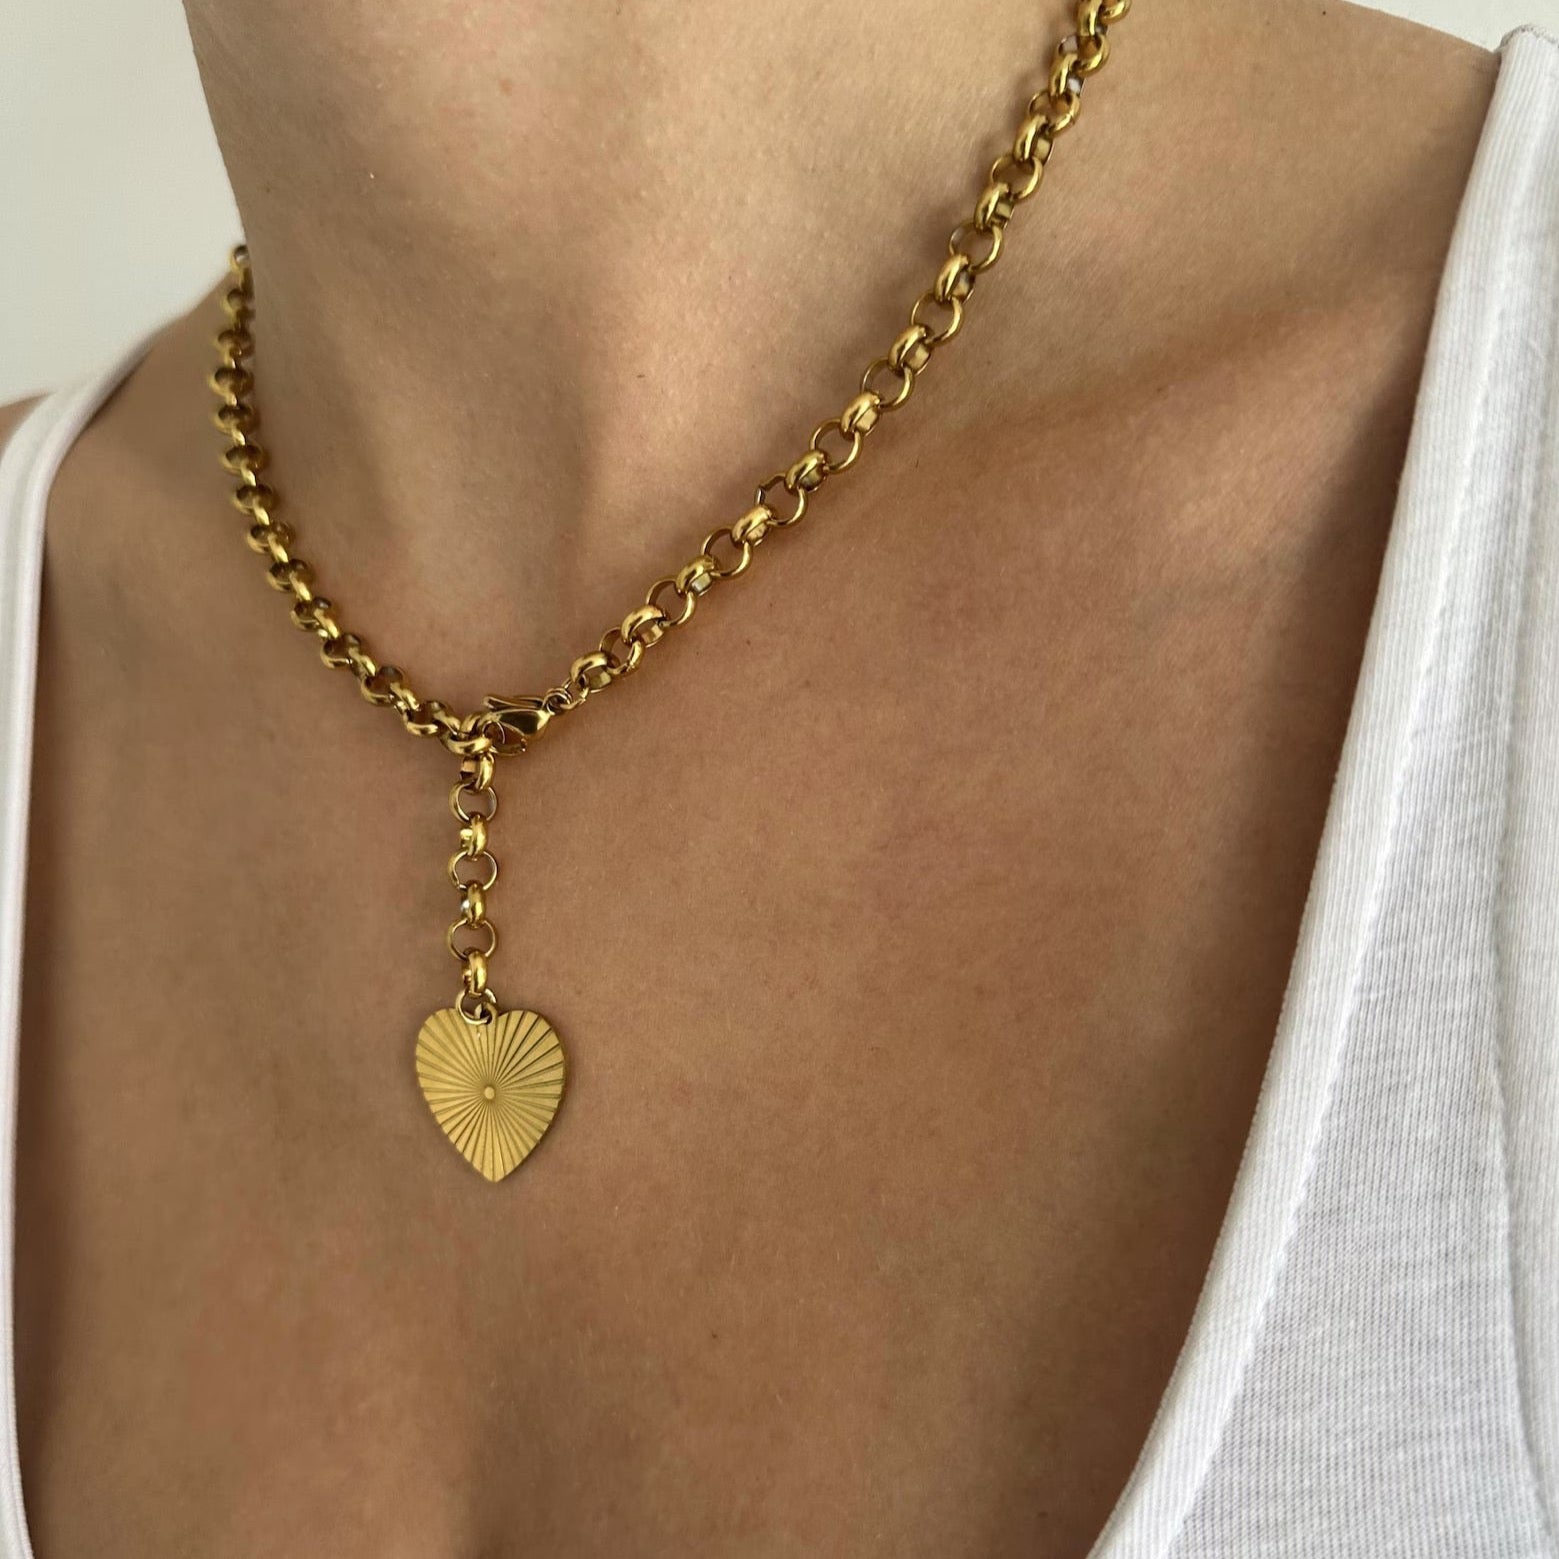 Classic golden heart necklace with modern allure